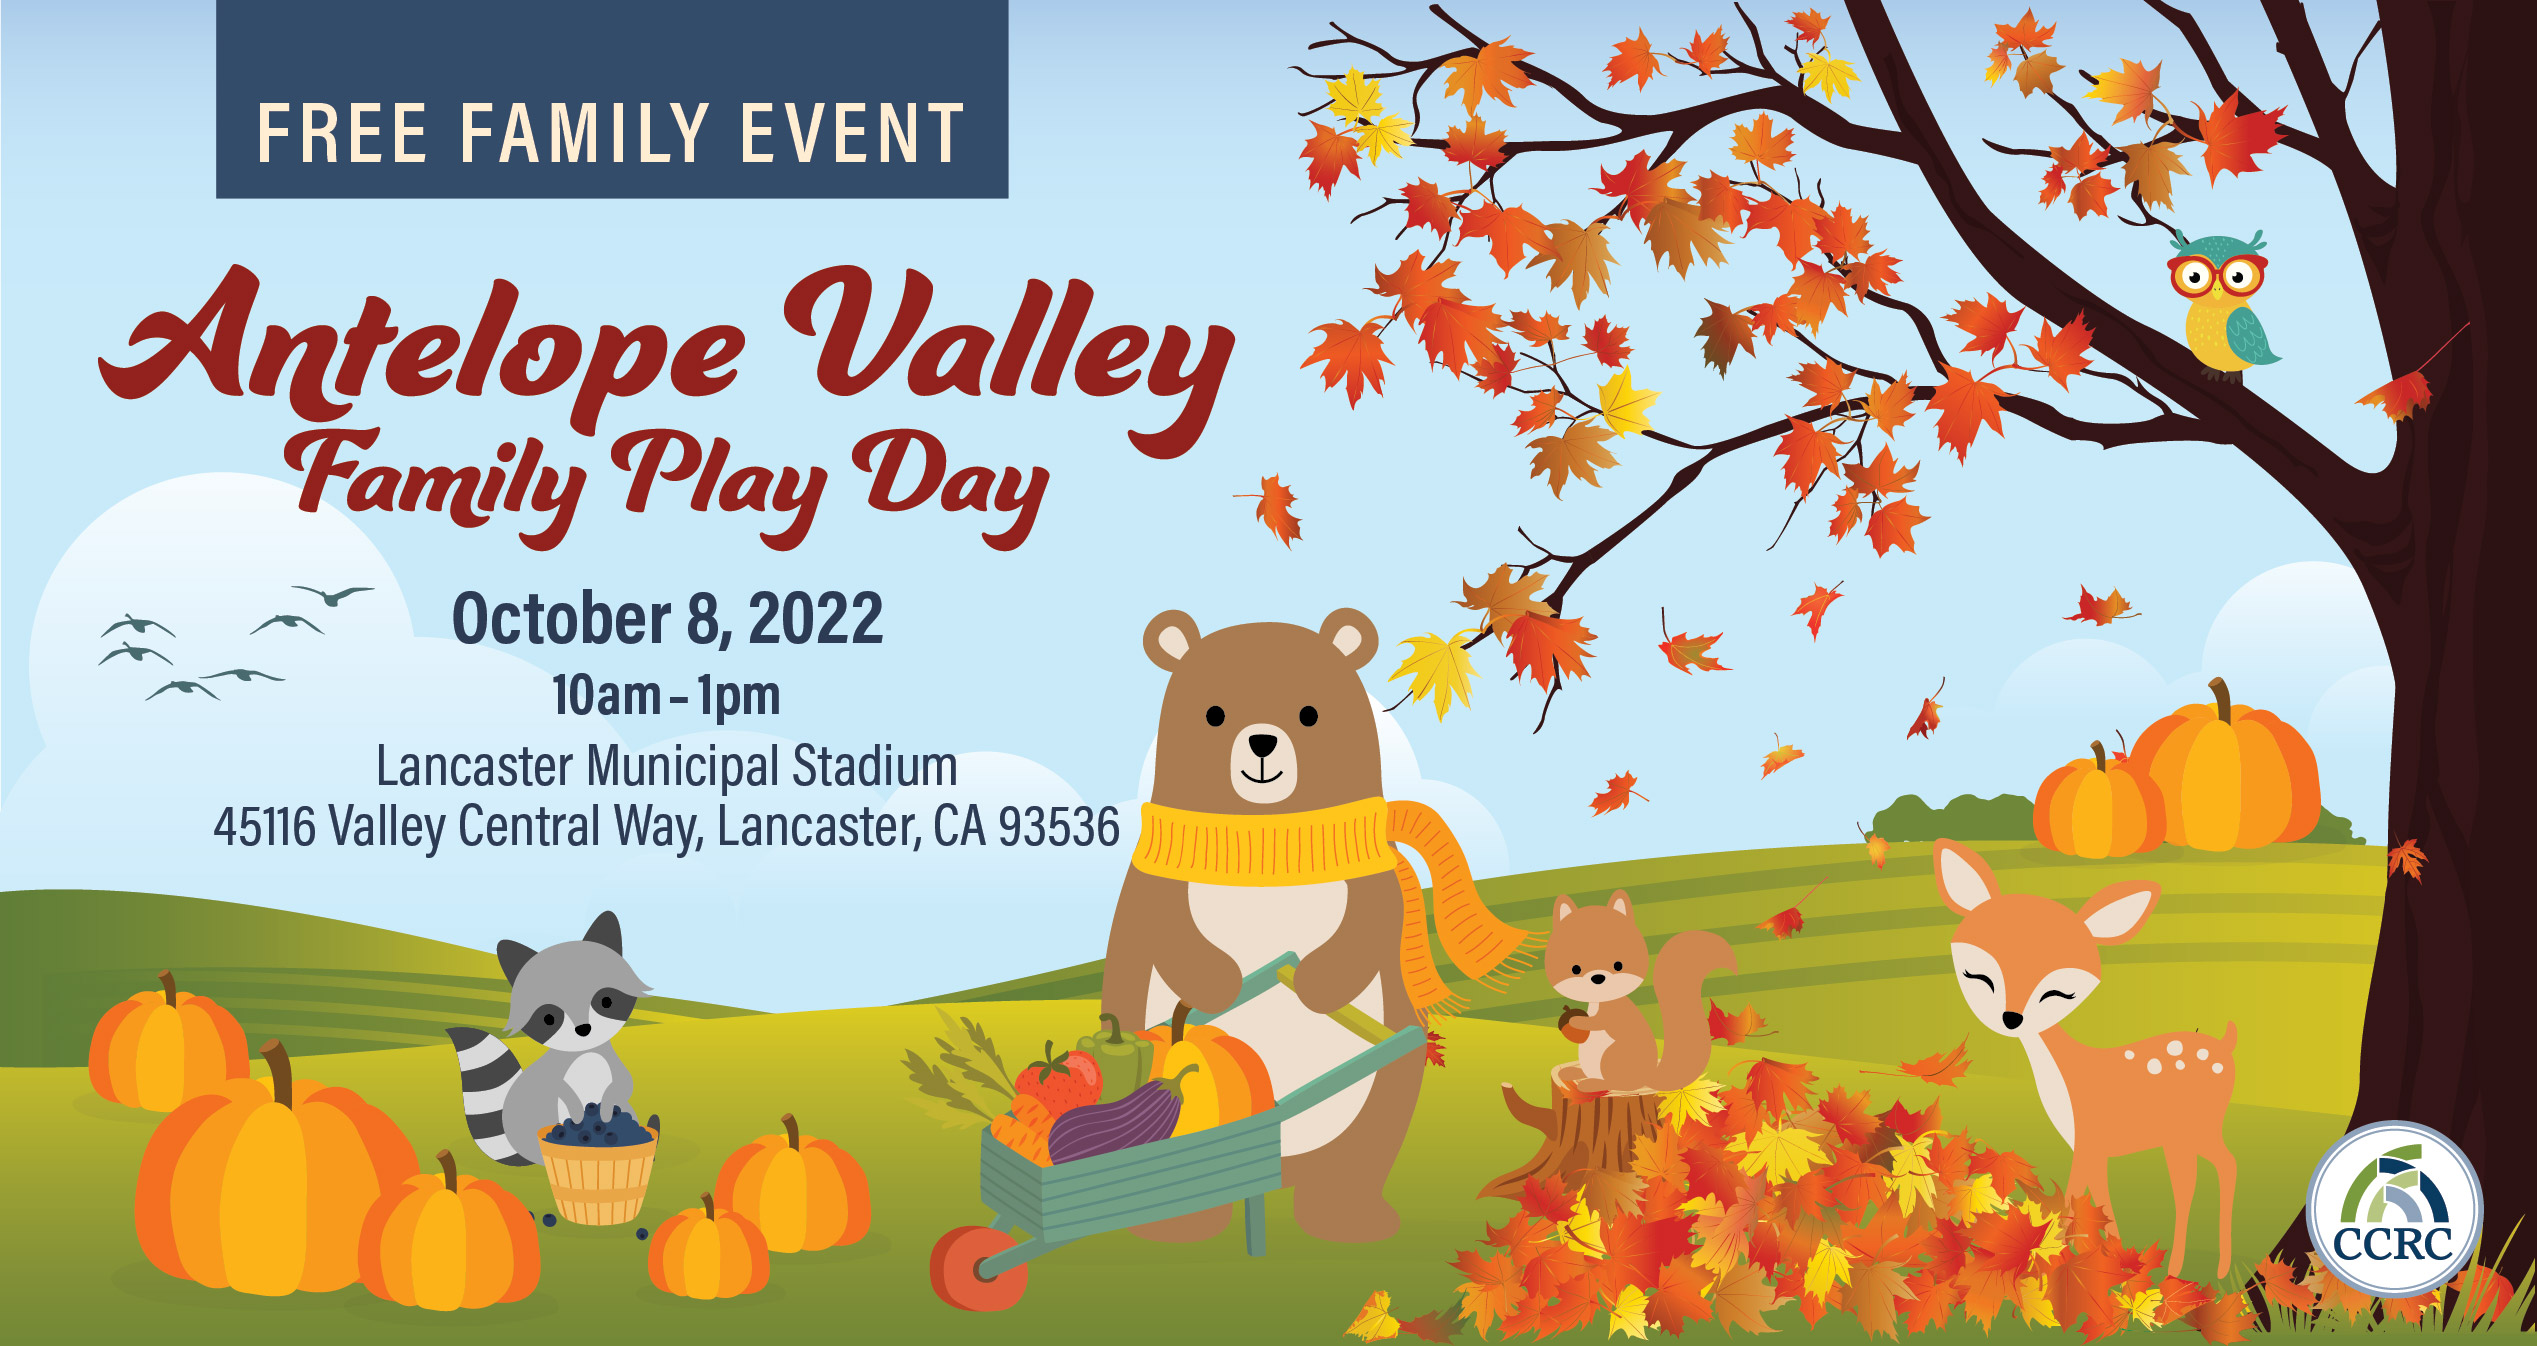 A promotional image for CCRC's Antelope Valley Family Play Day that took place October 2022 featuring fall colors, forest animals.